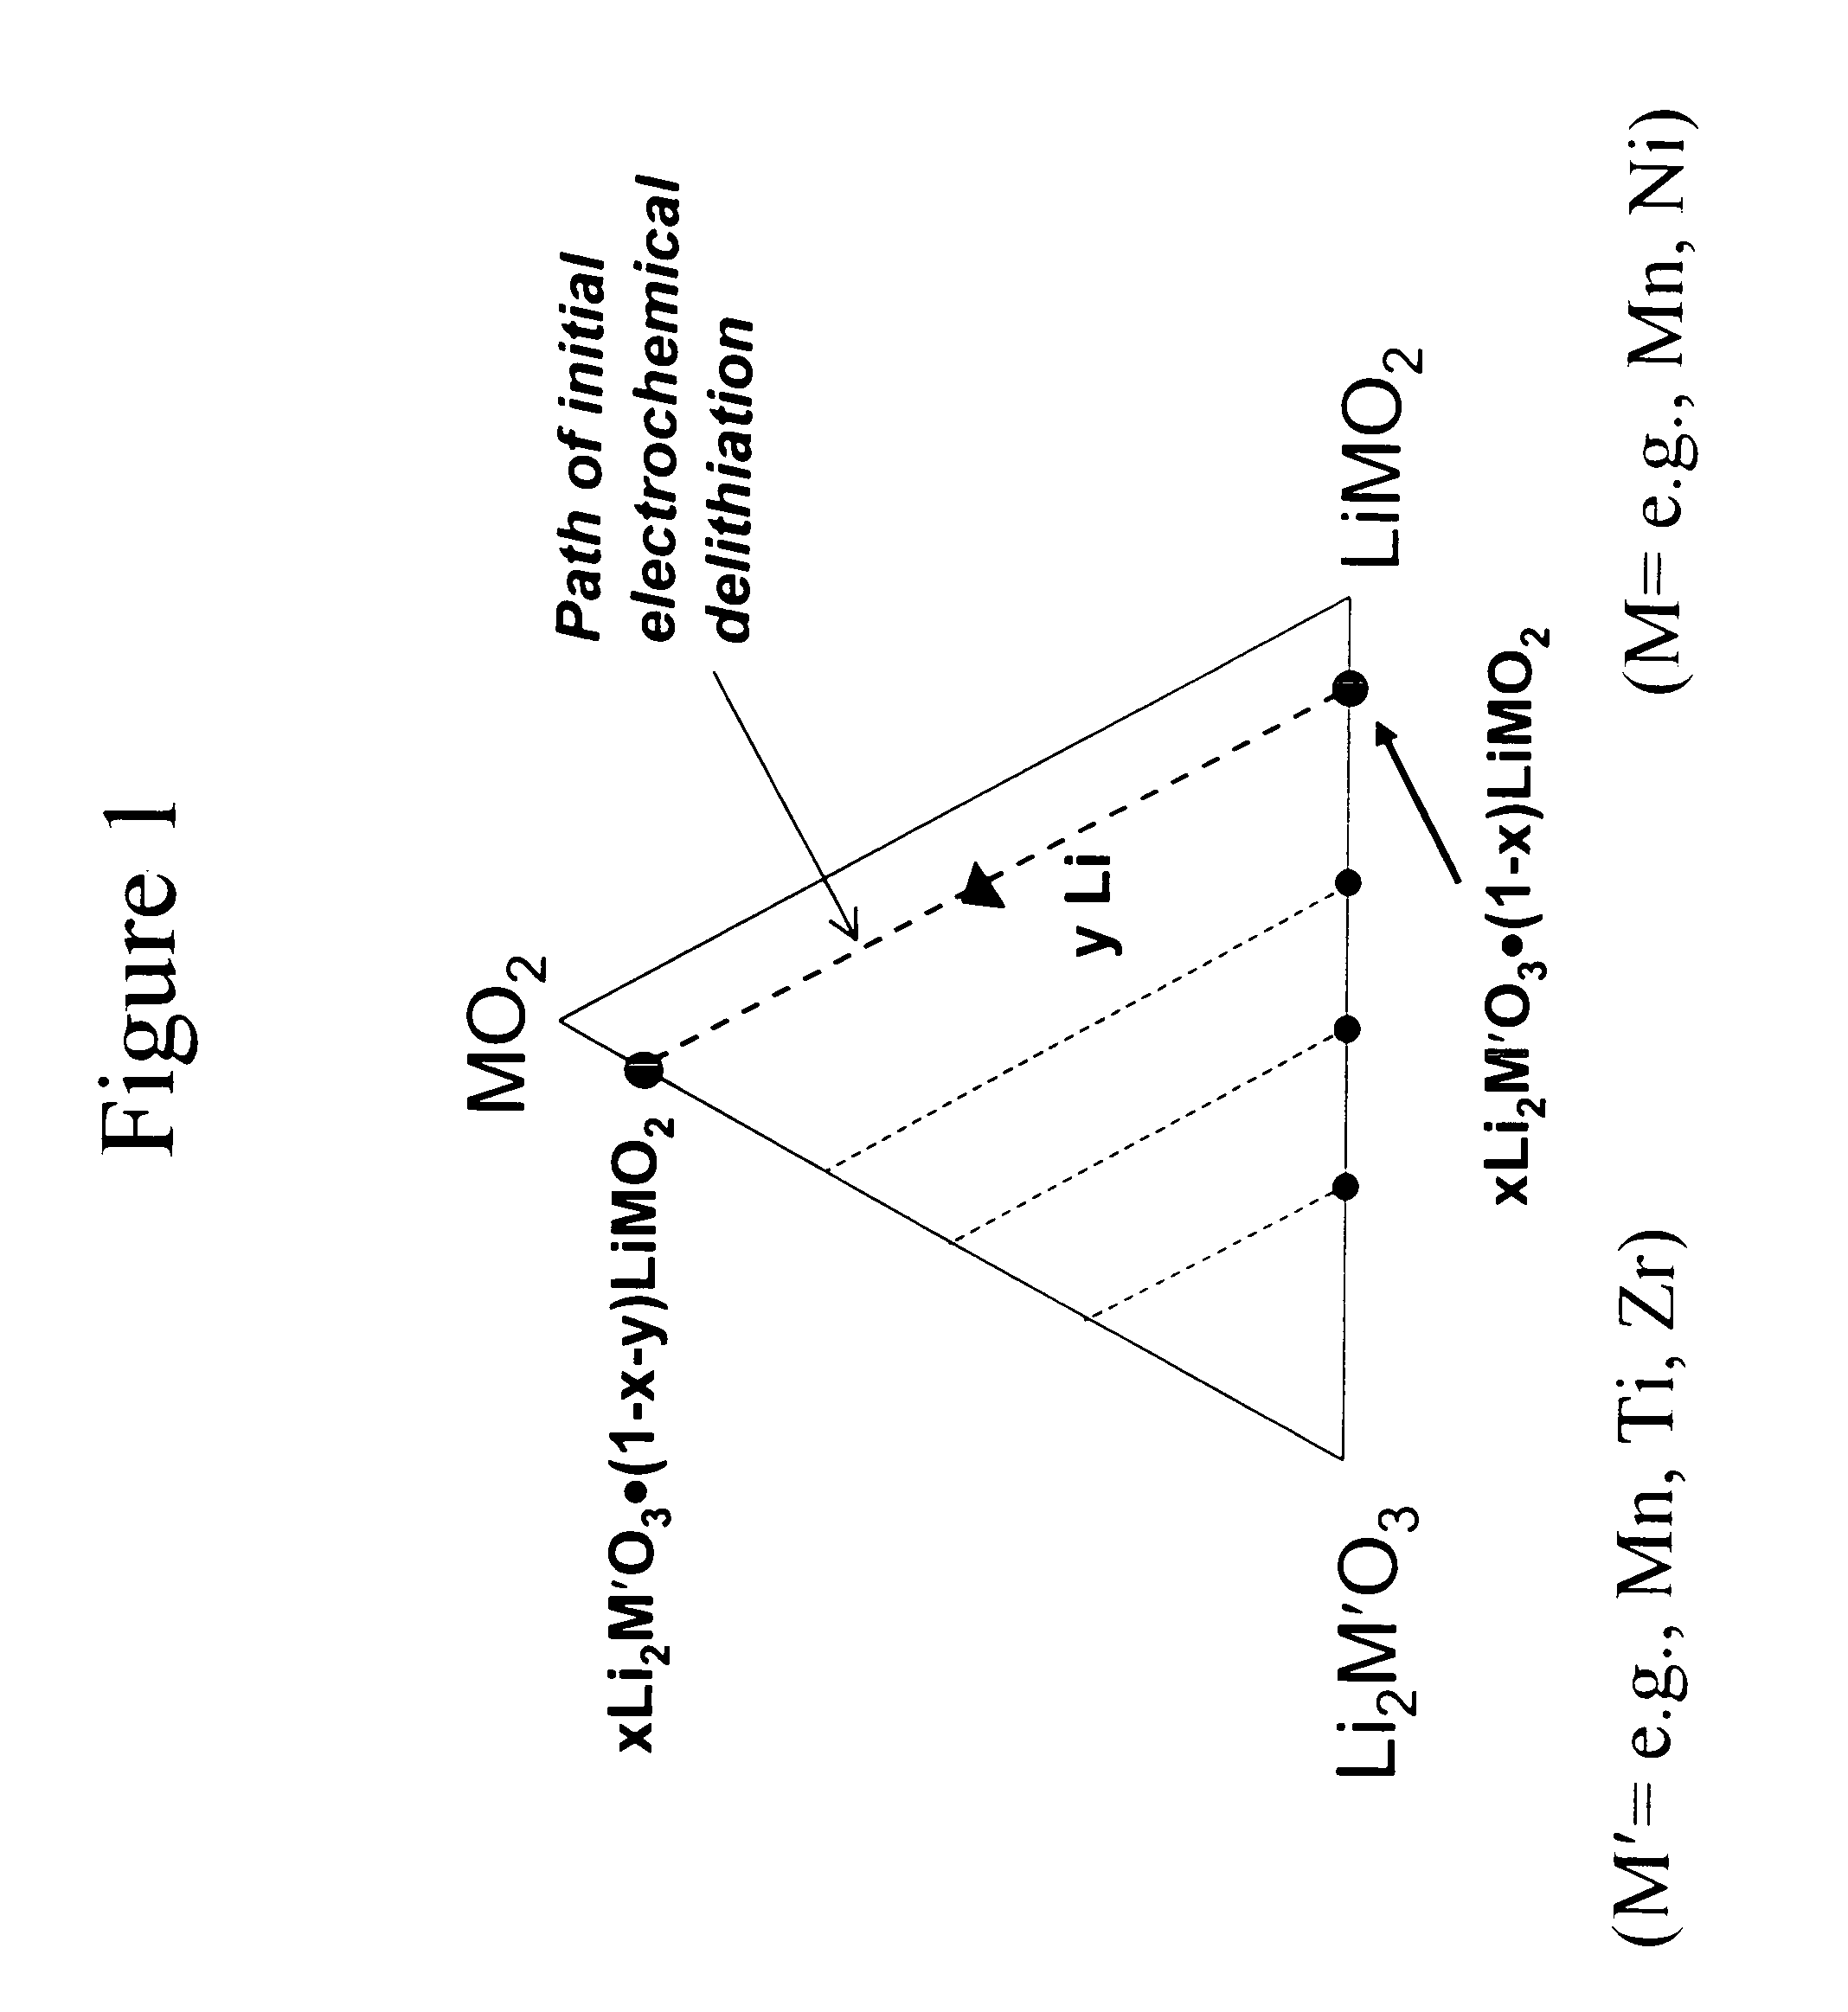 Lithium metal oxide electrodes for lithium cells and batteries